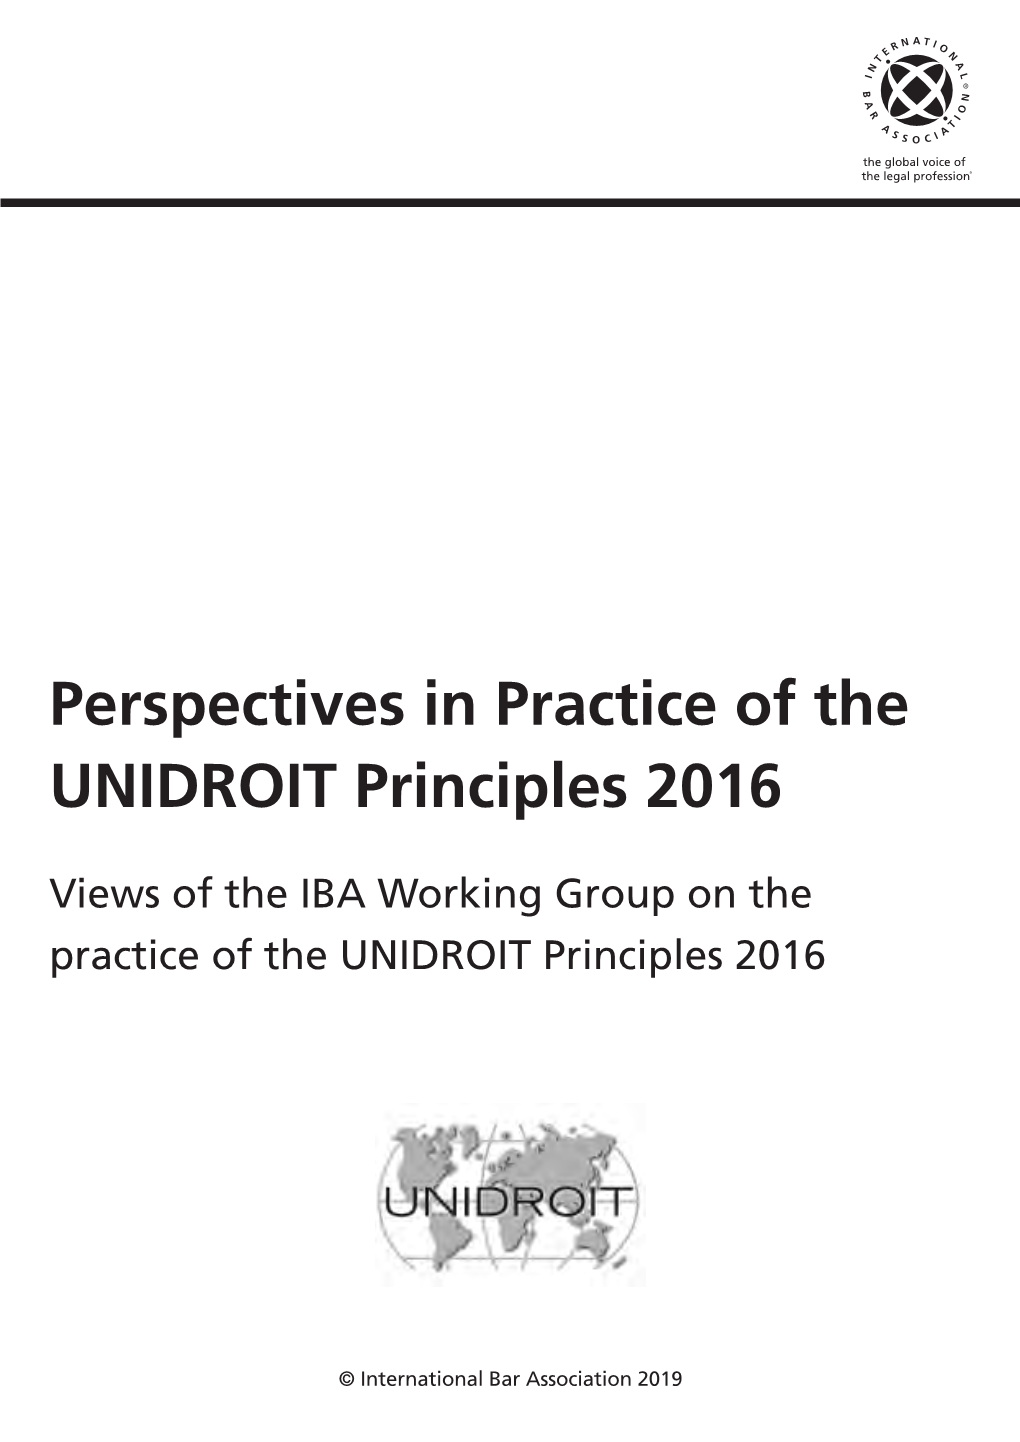 Perspectives in Practice of the UNIDROIT Principles 2016